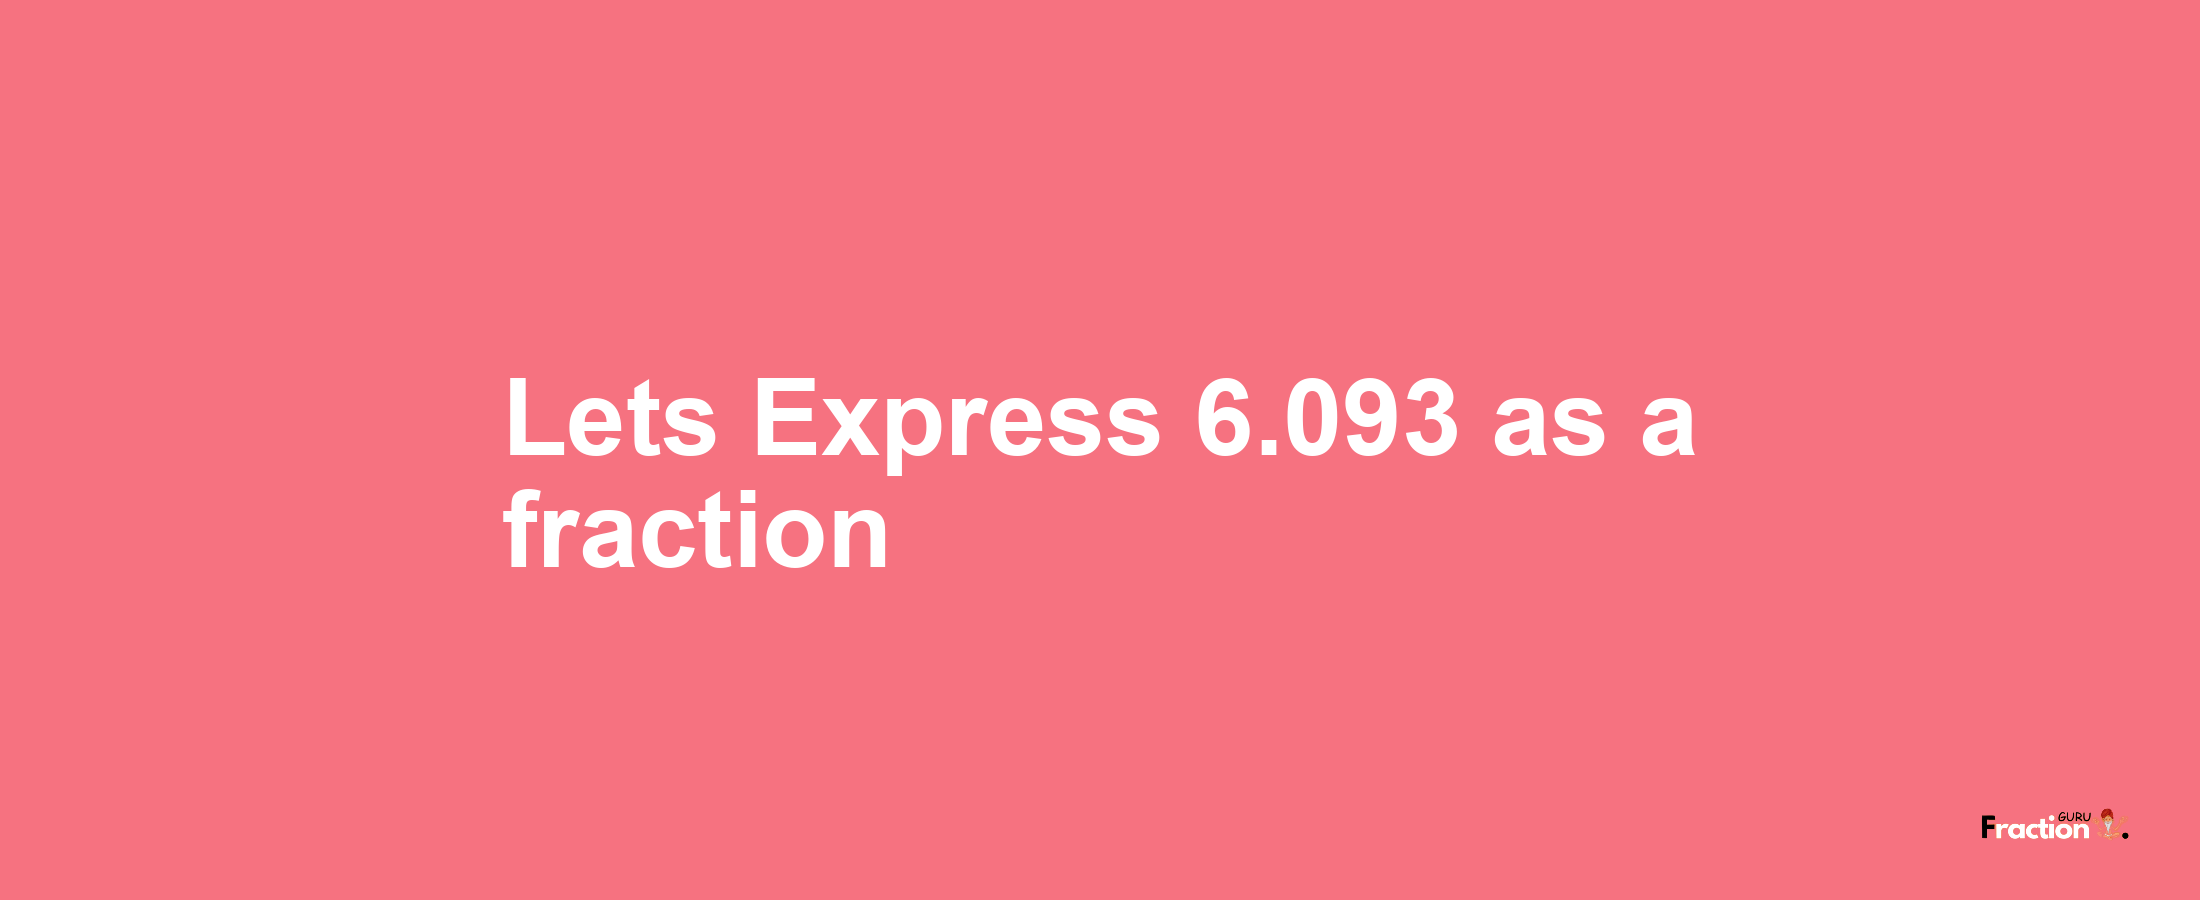 Lets Express 6.093 as afraction